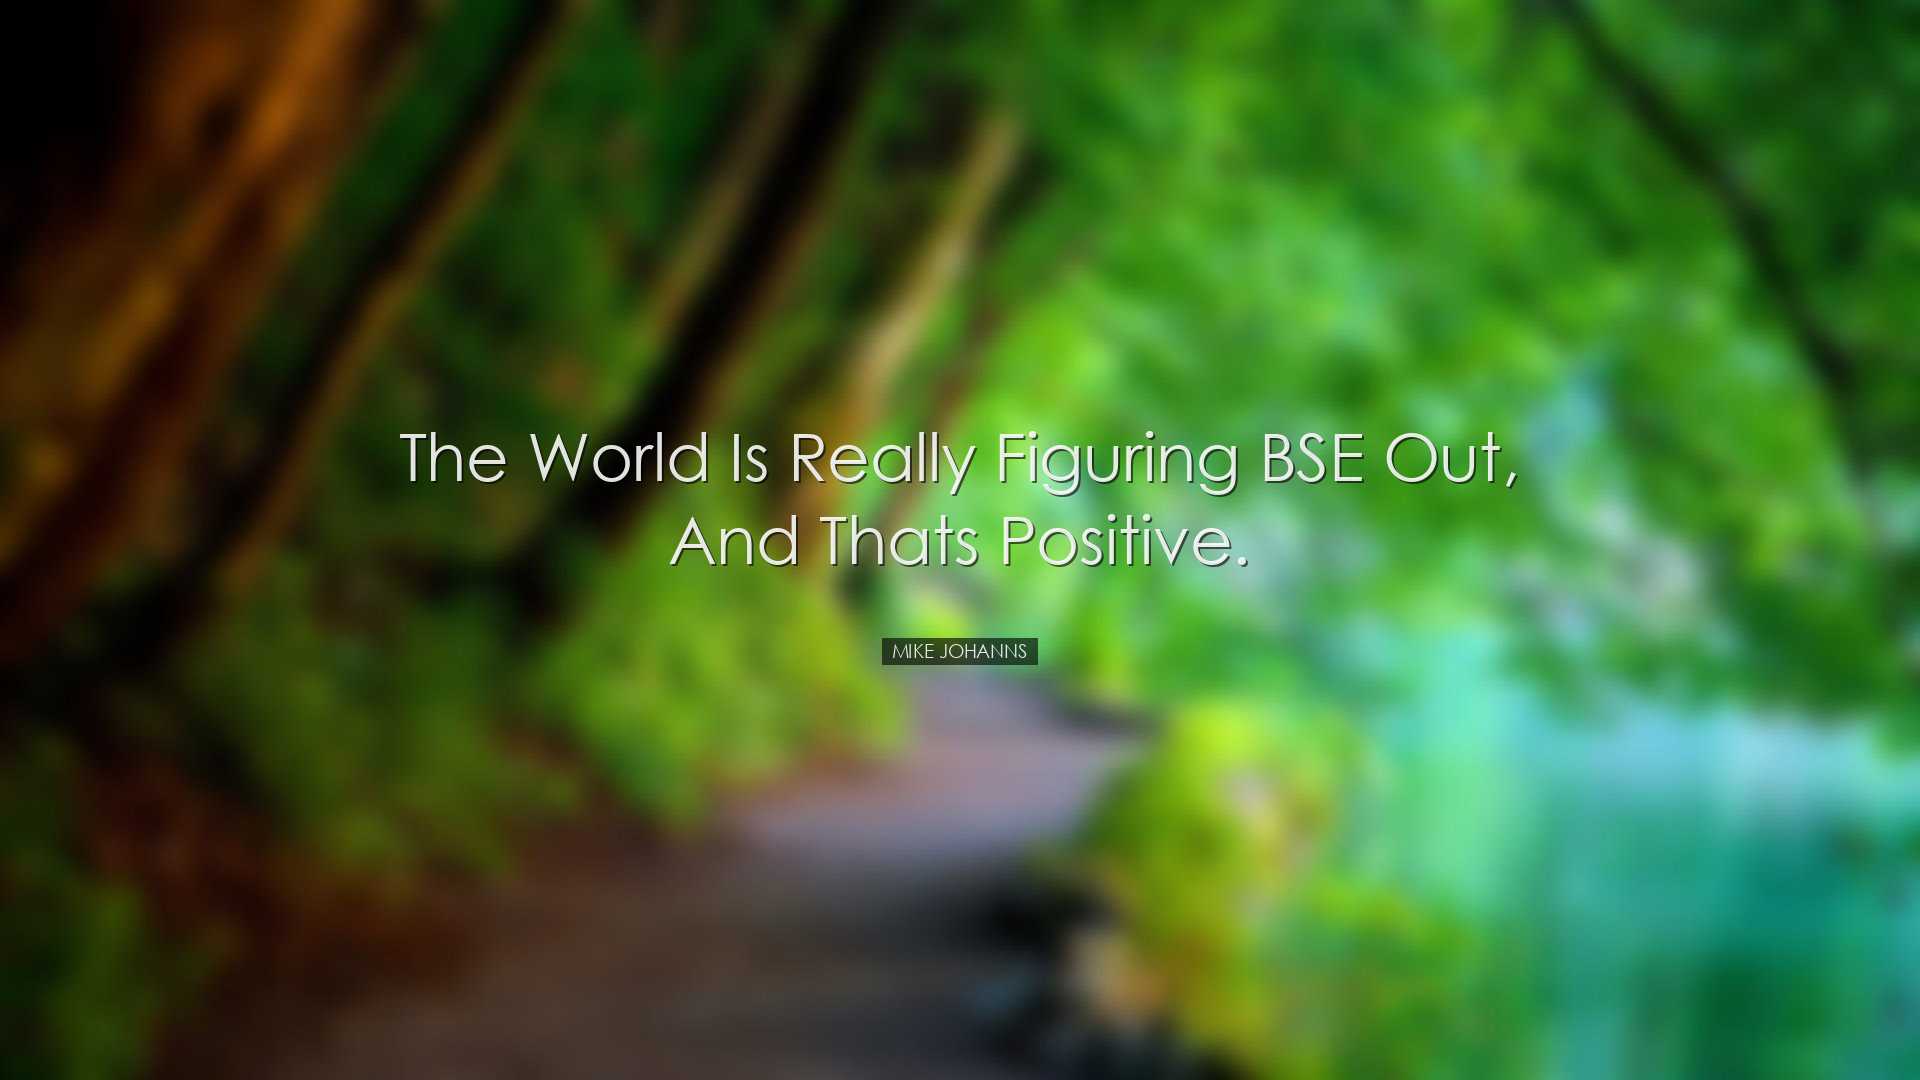 The world is really figuring BSE out, and thats positive. - Mike J